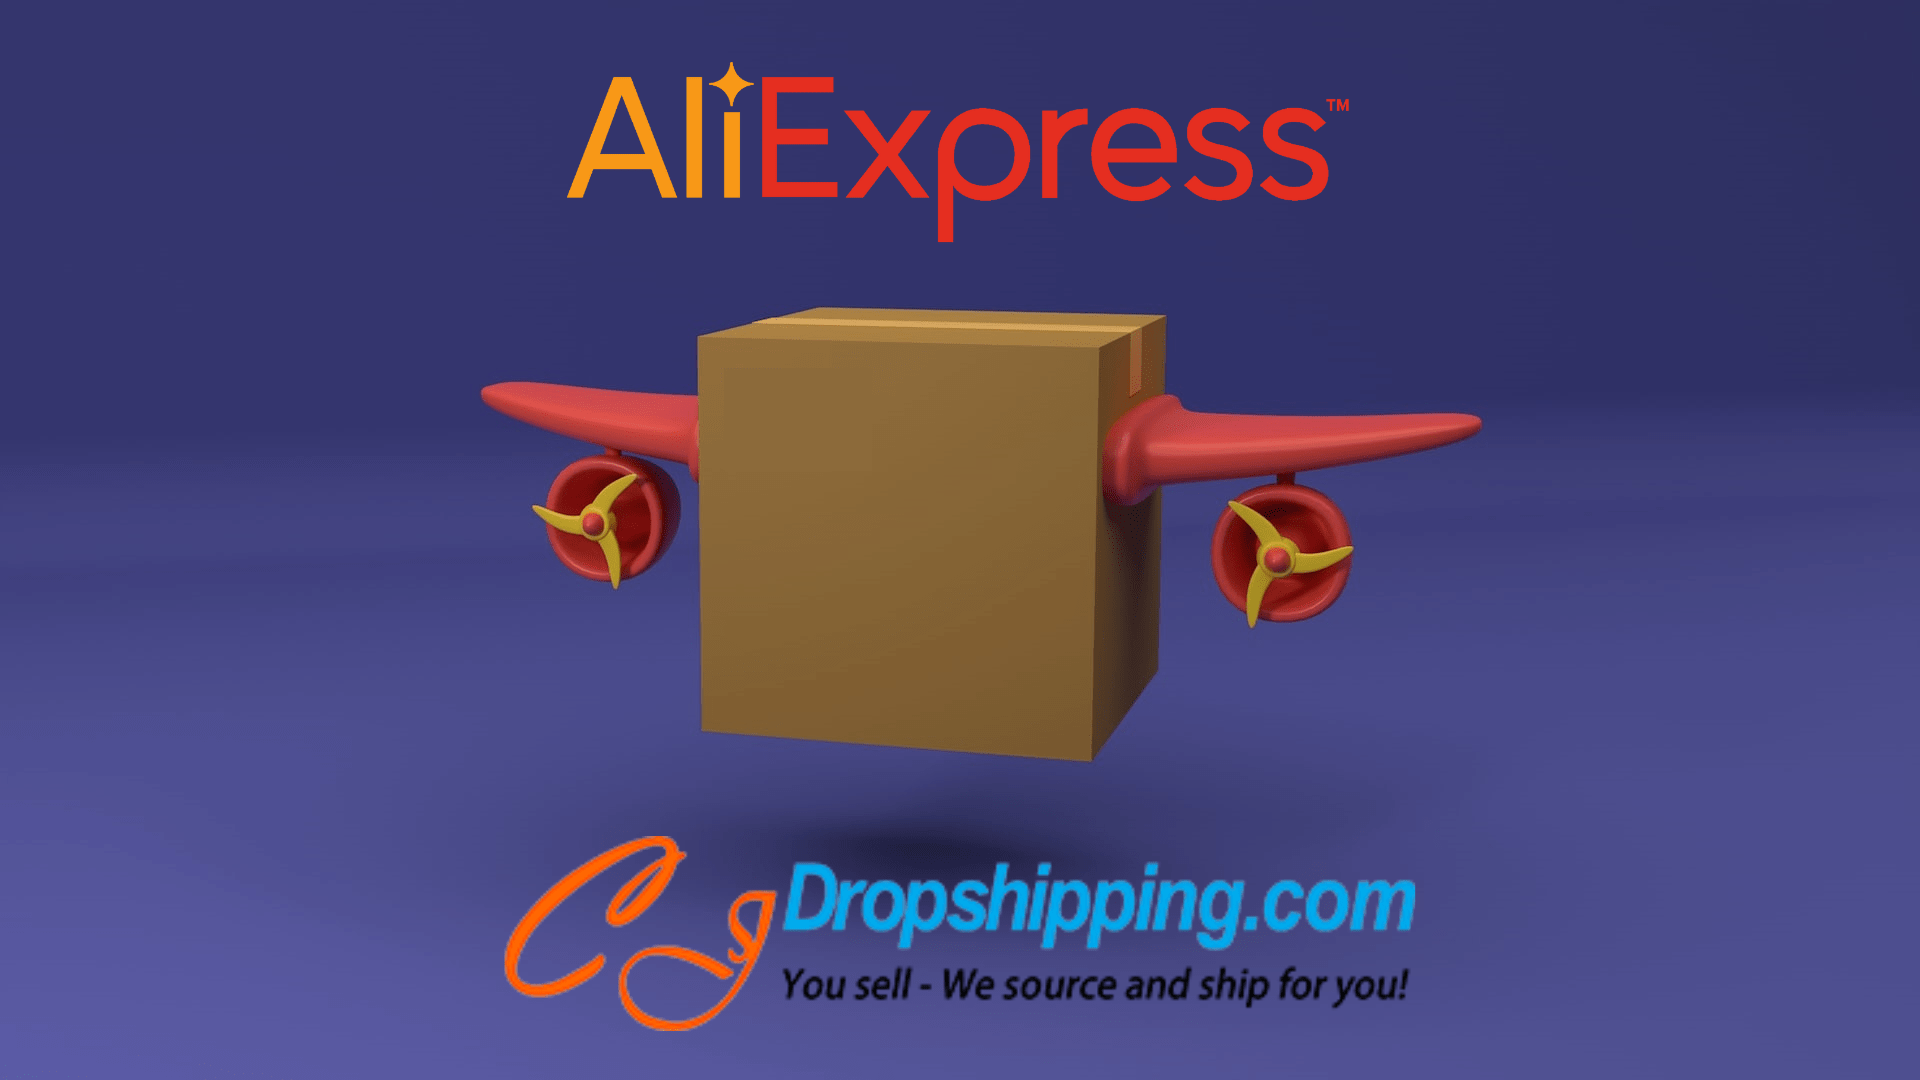 CJDropshipping Vs AliExpress: Which Is Better for Dropshipping?